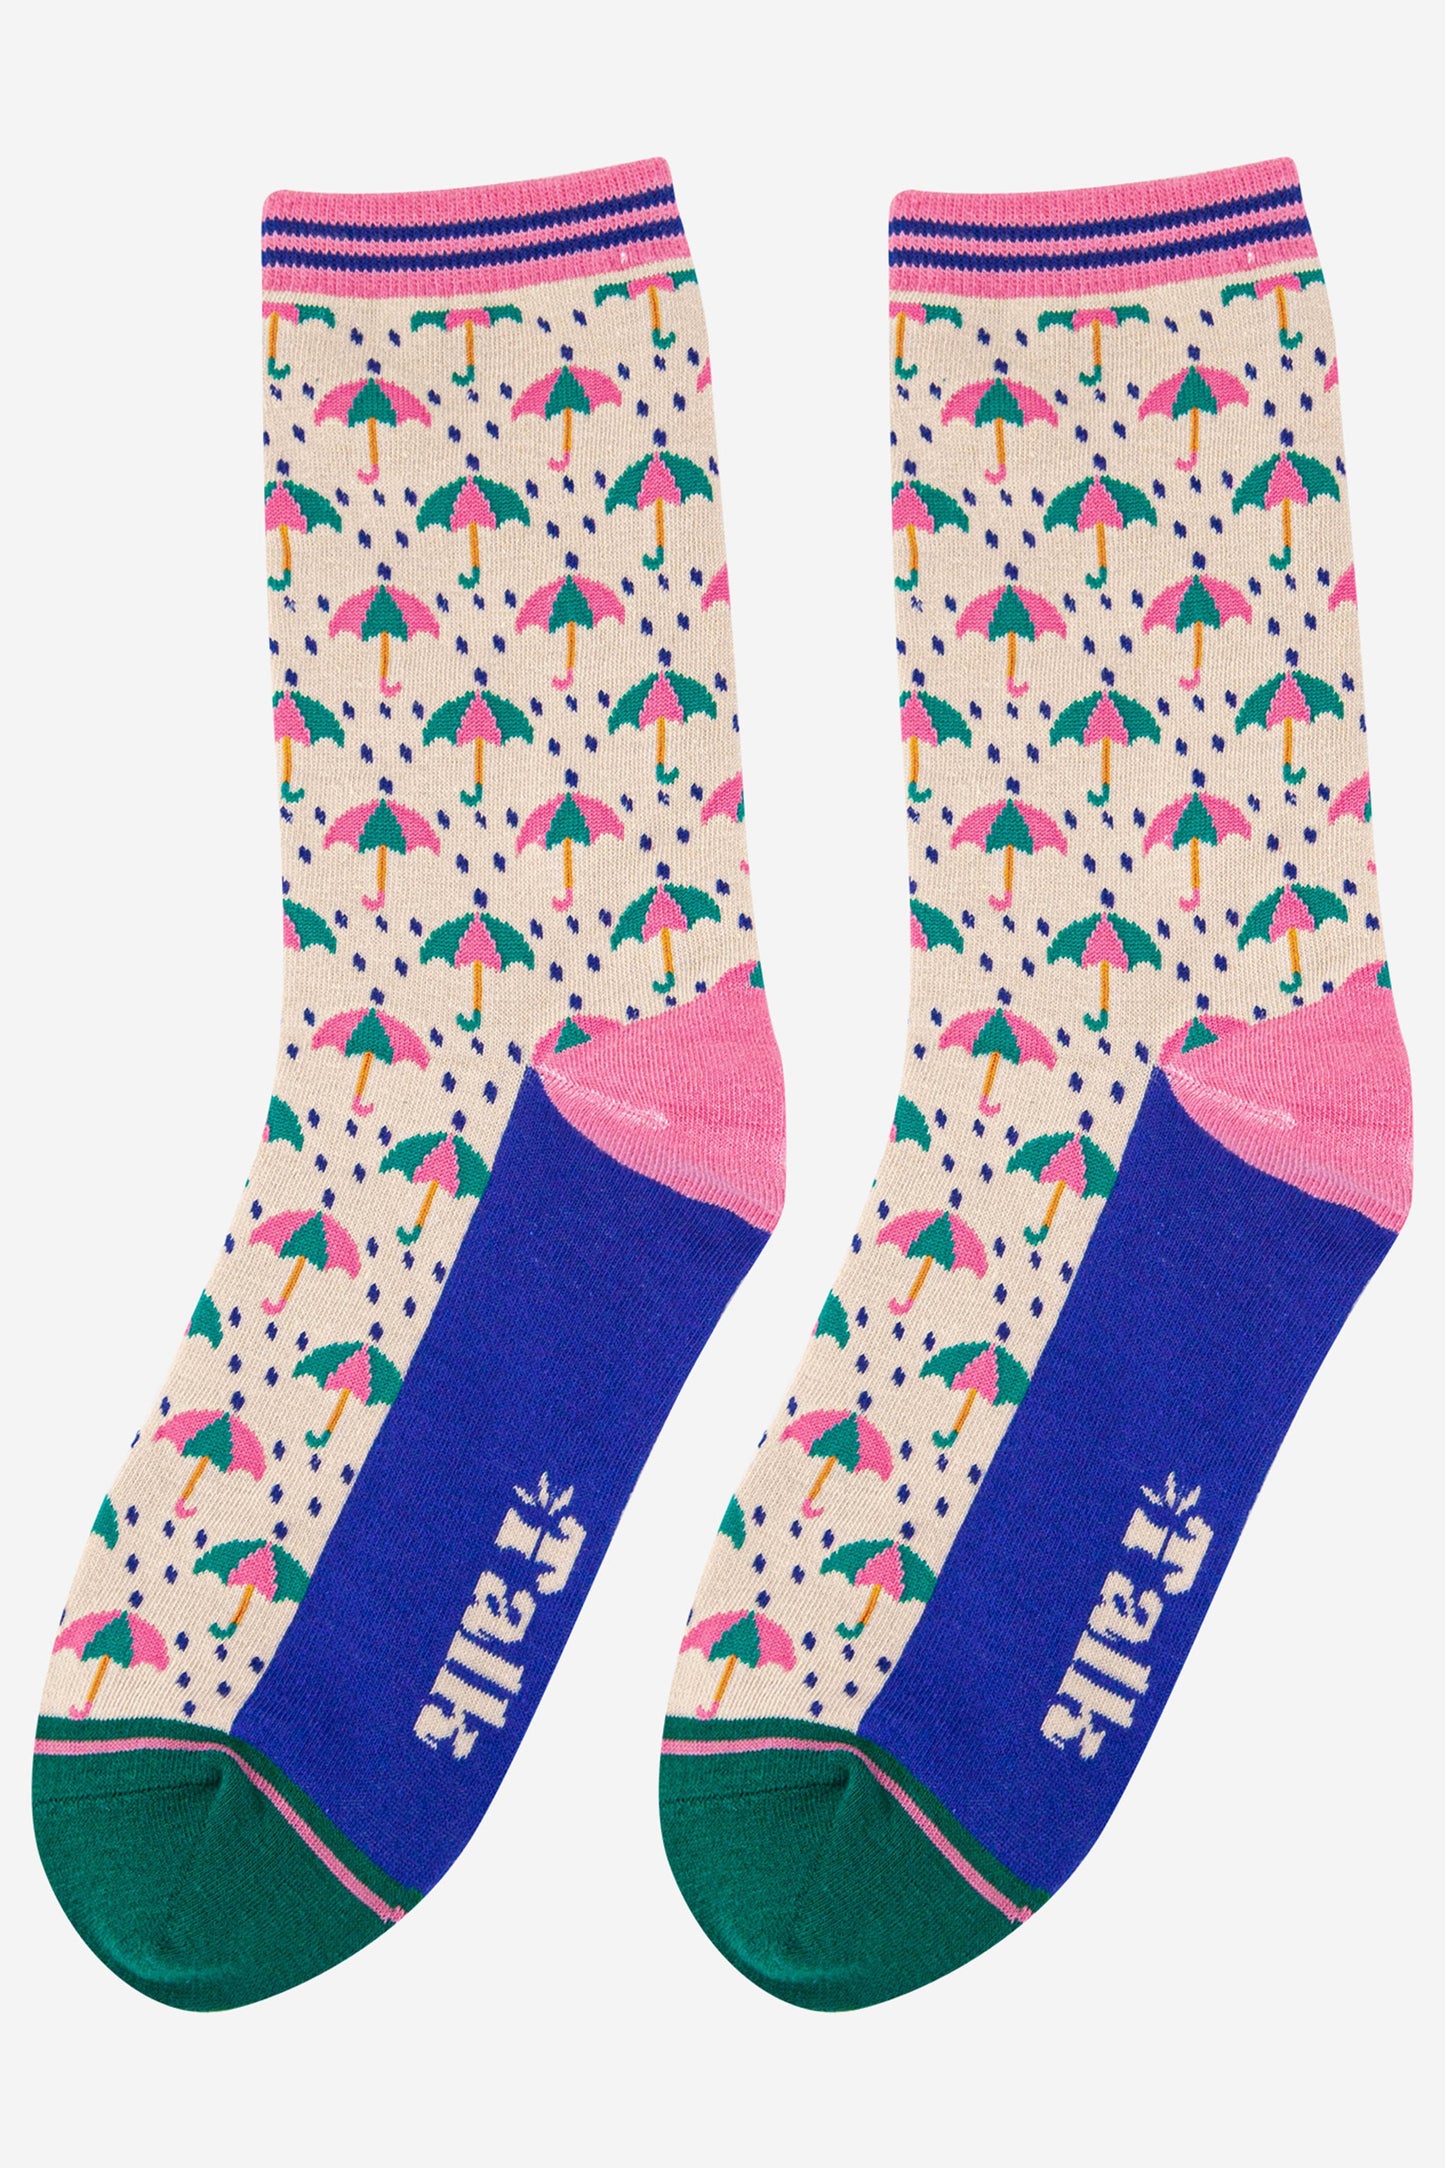 cream, pink and blue bamboo socks with an all over rainy day umbrella pattern